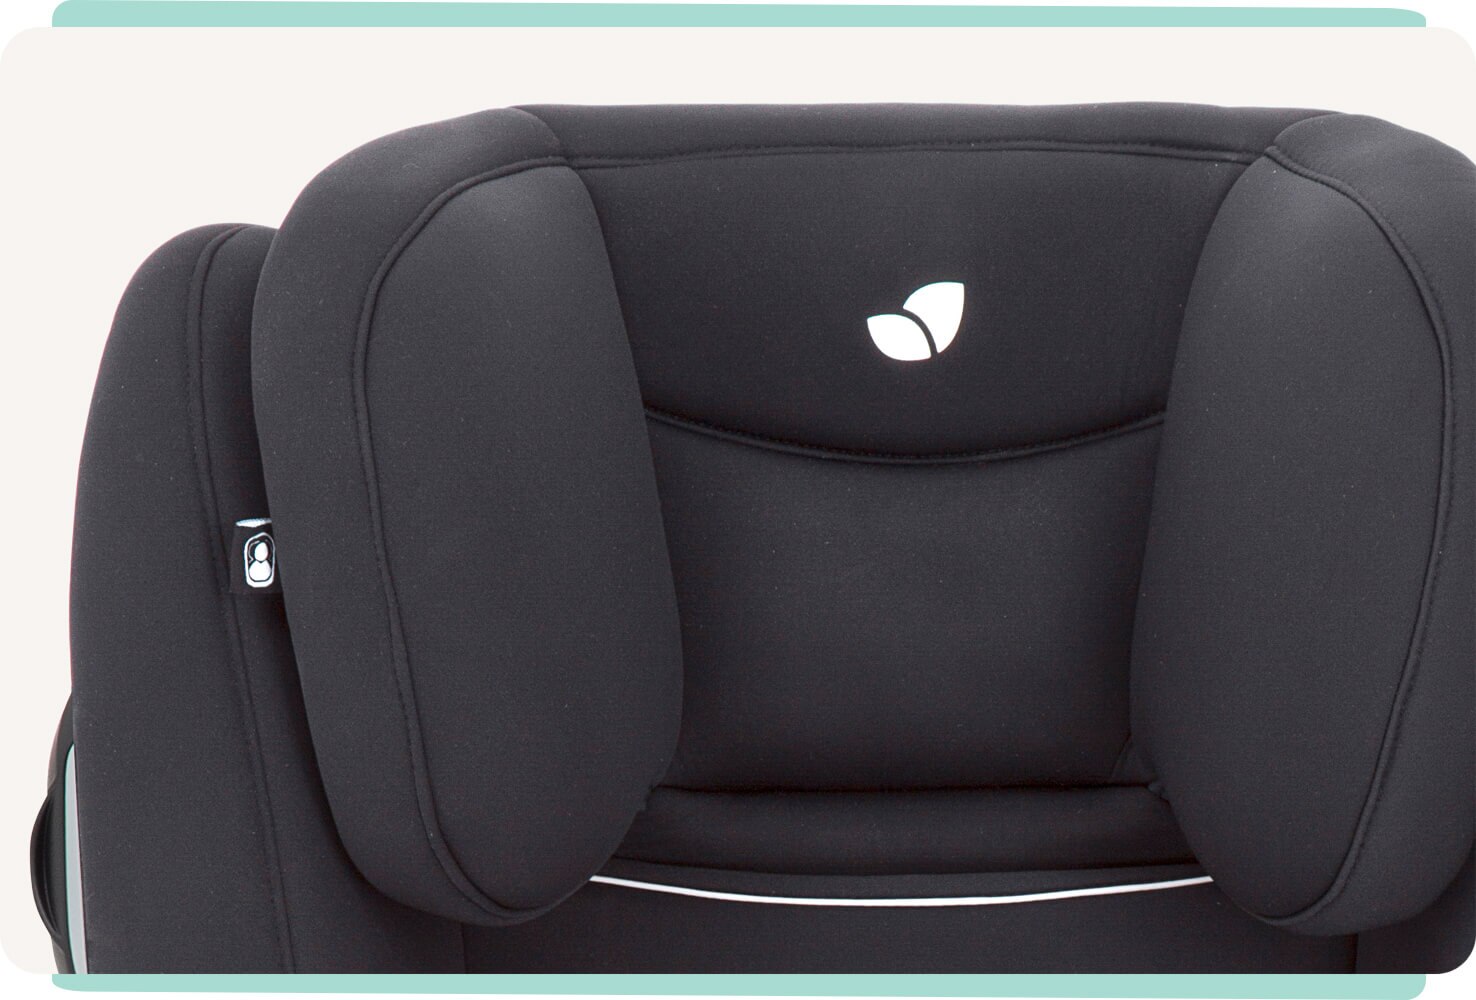  Closeup of the Joie Duallo booster car seat headrest in black.